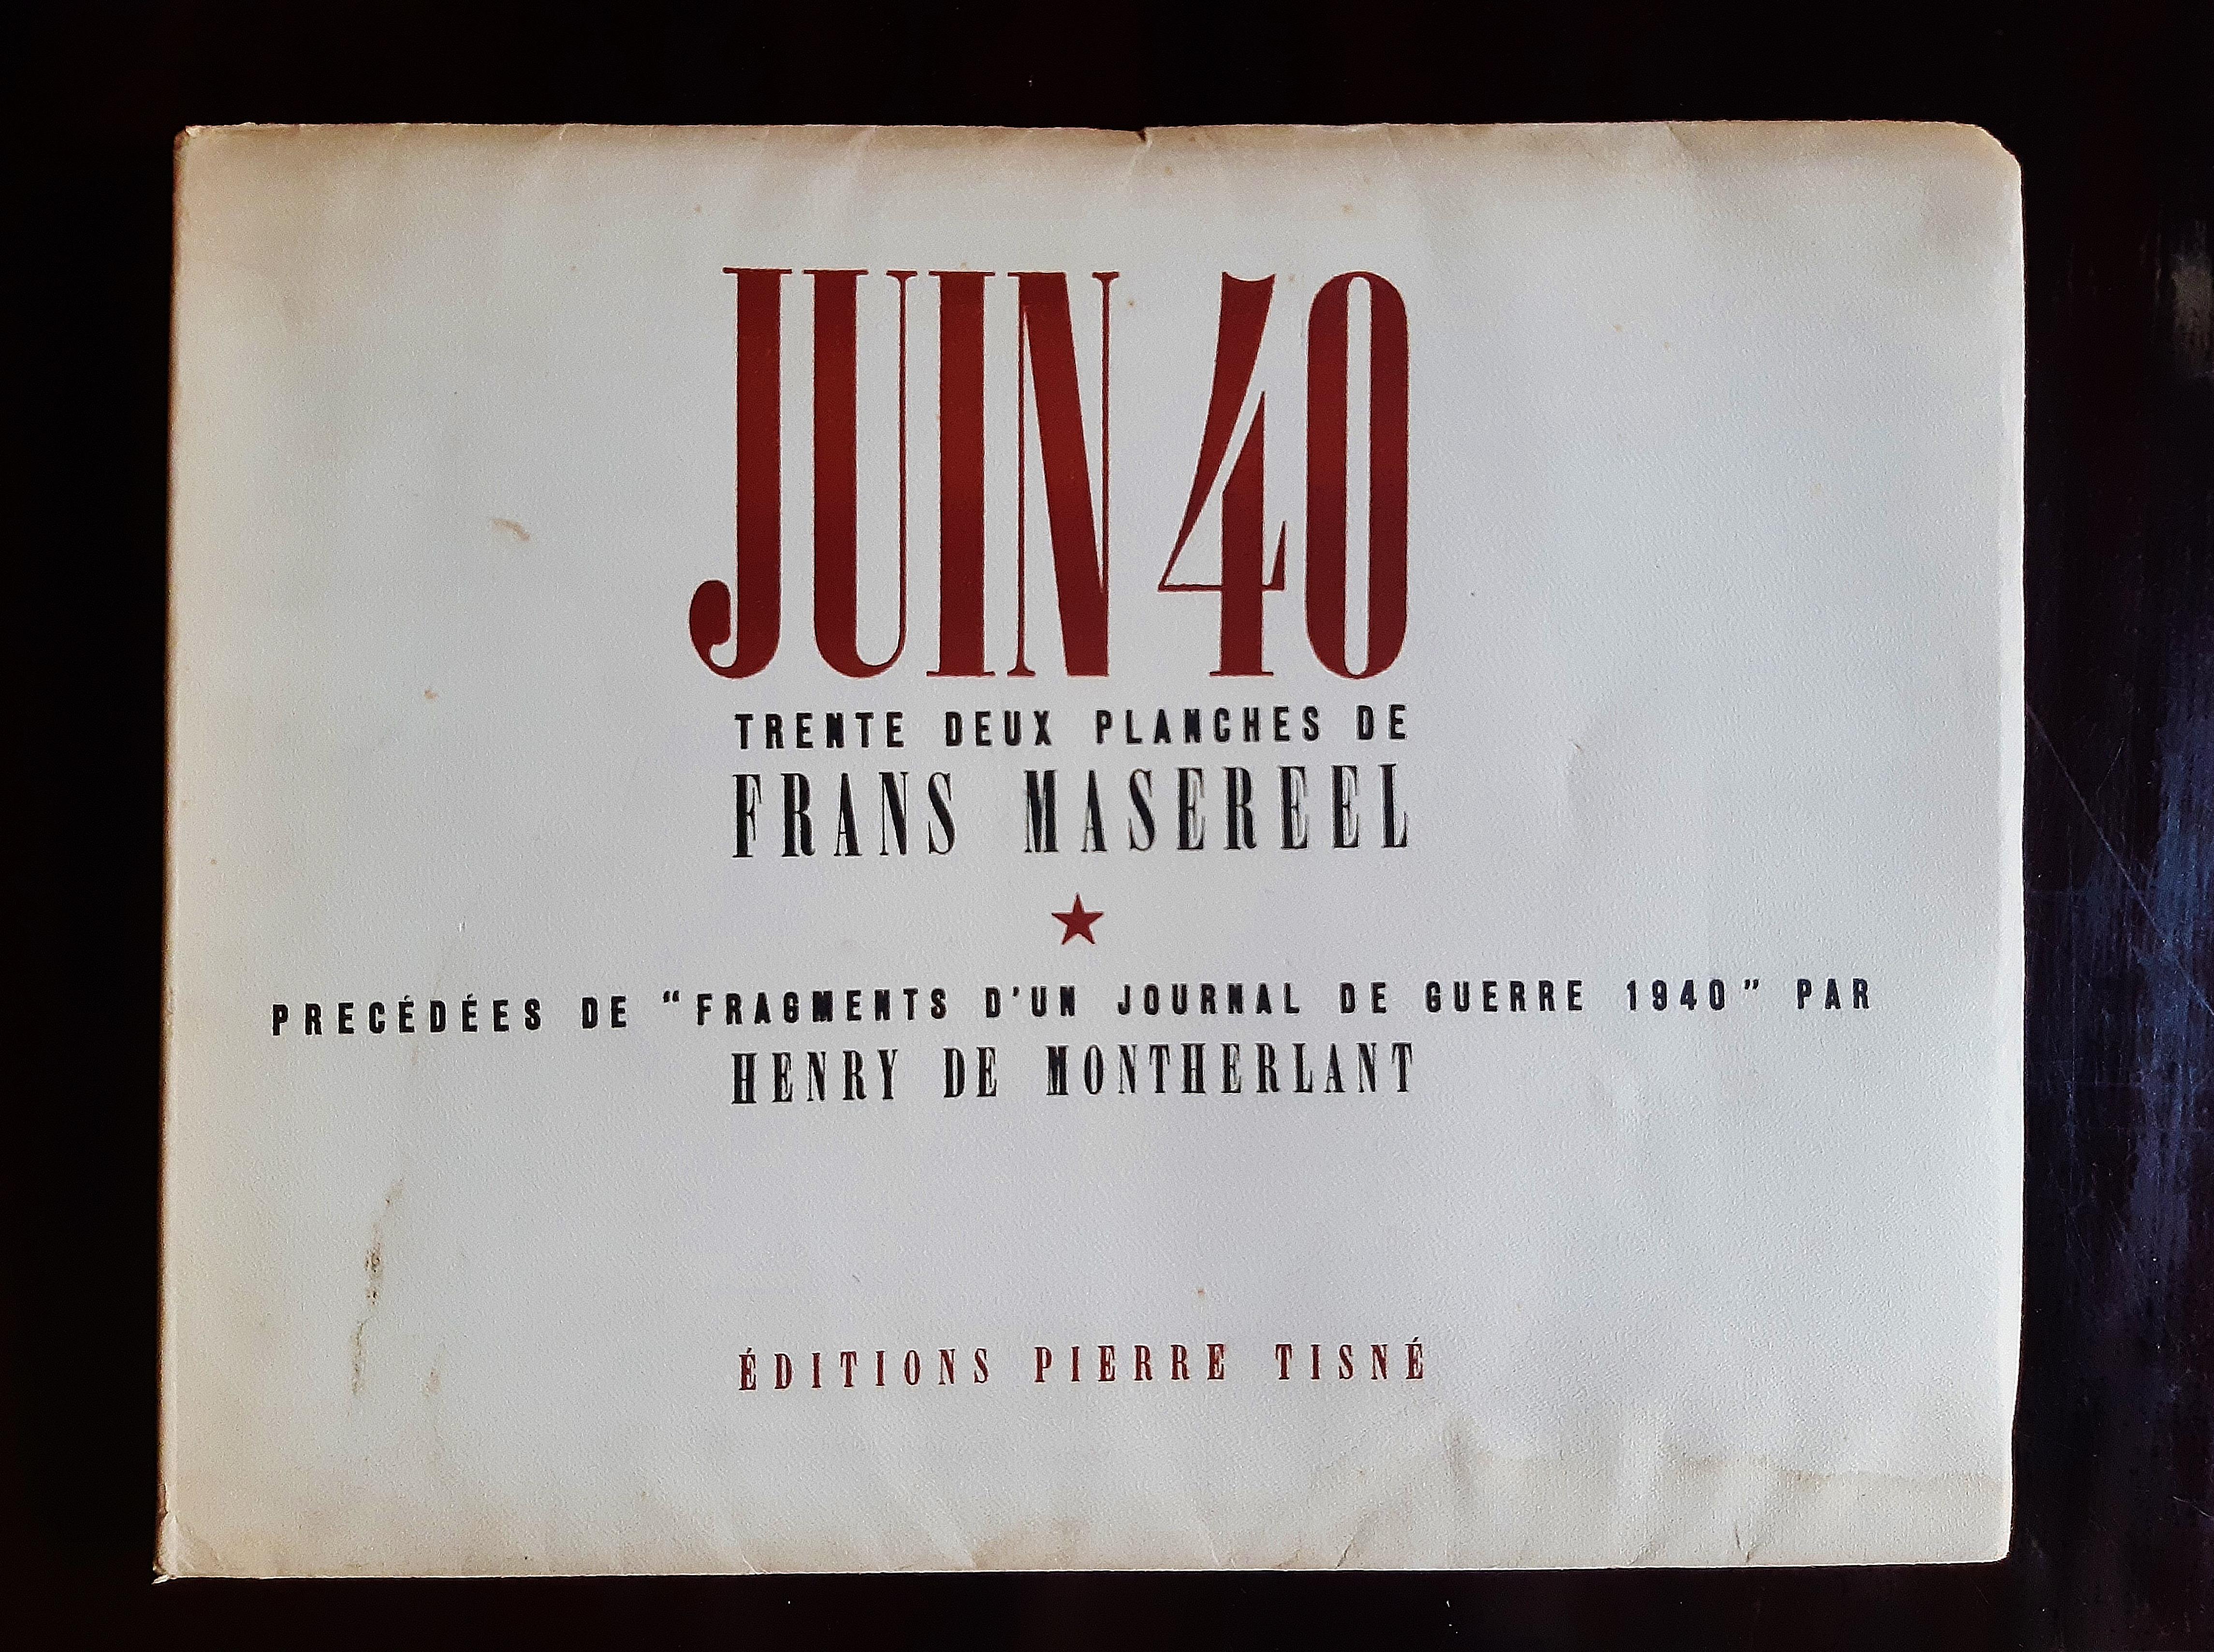 Juin 40 - Rare Book Illustrated by Frans Masereel - 1912 For Sale 4